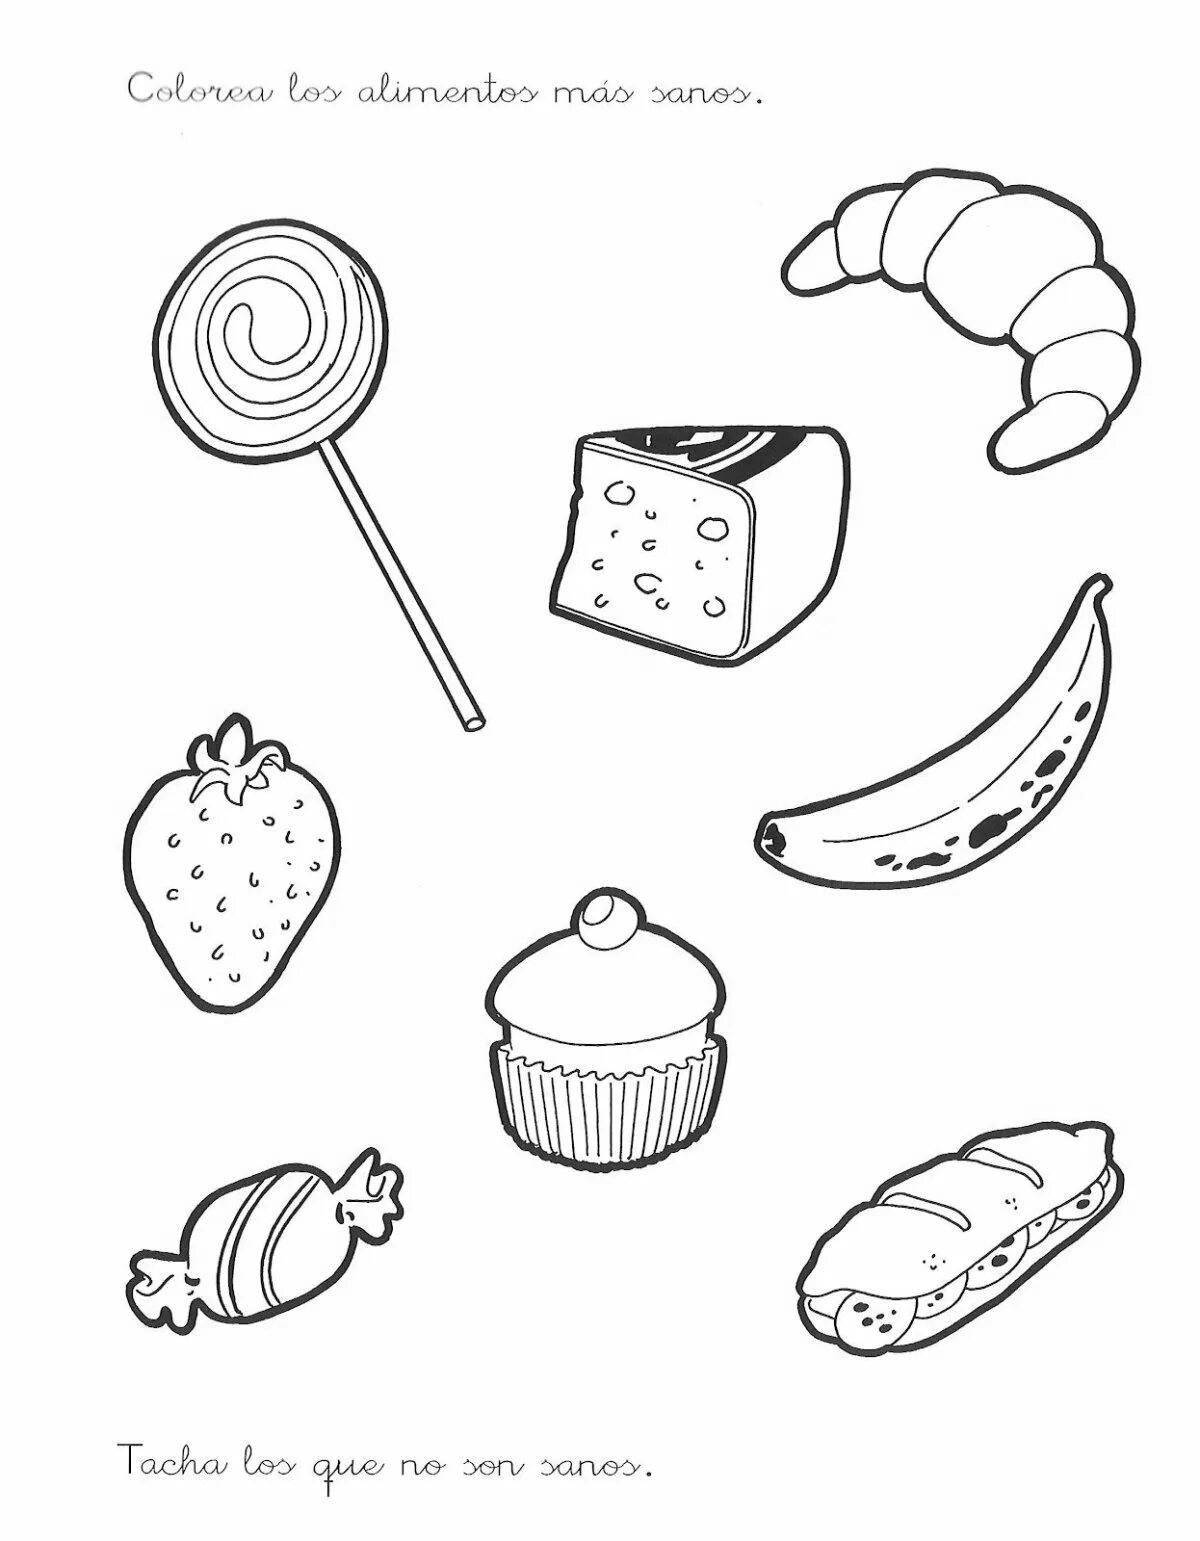 Colorful food coloring page for 6-7 years group logo